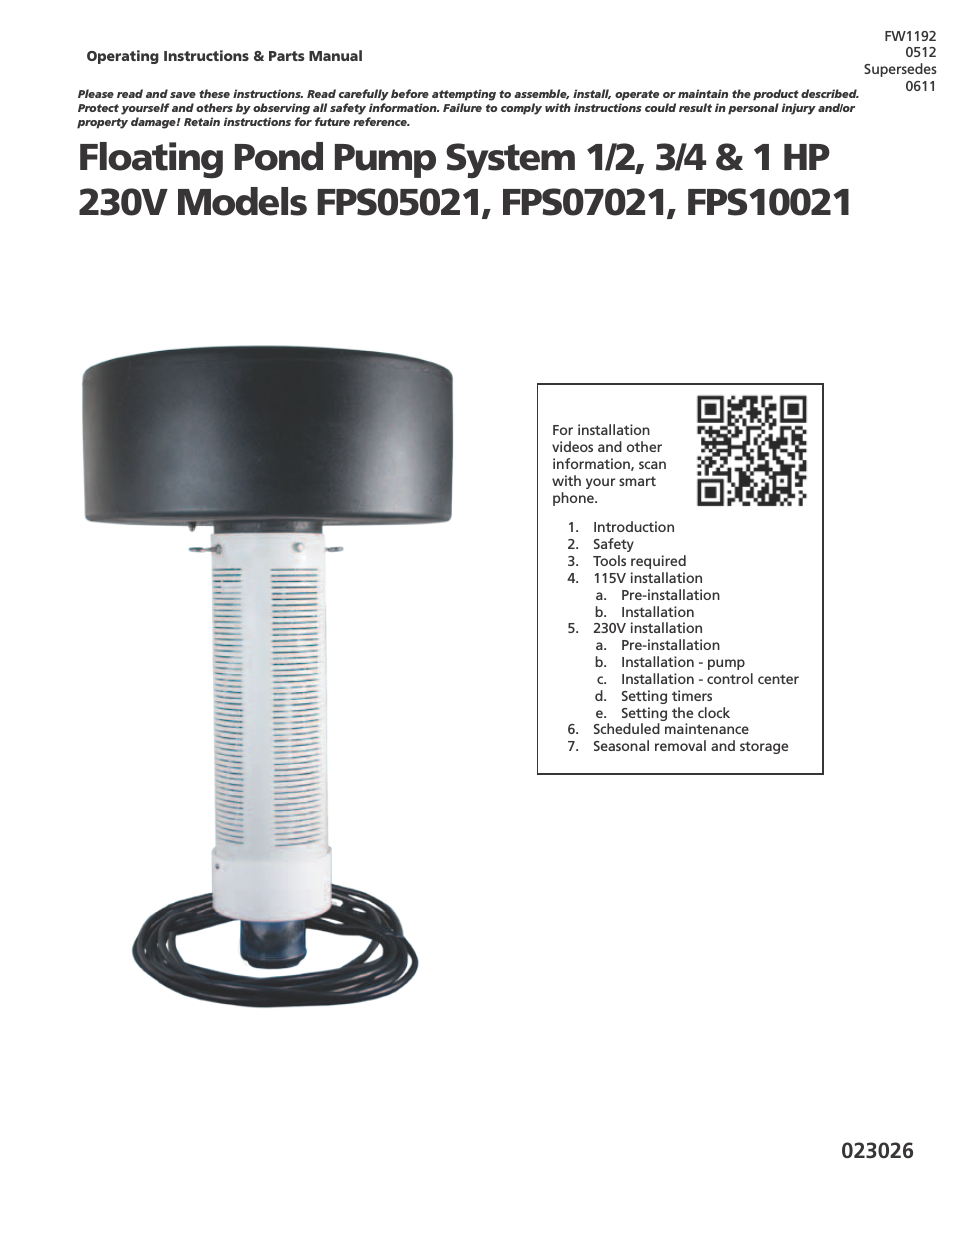 230V Pond and Fountain Systems FPS10021